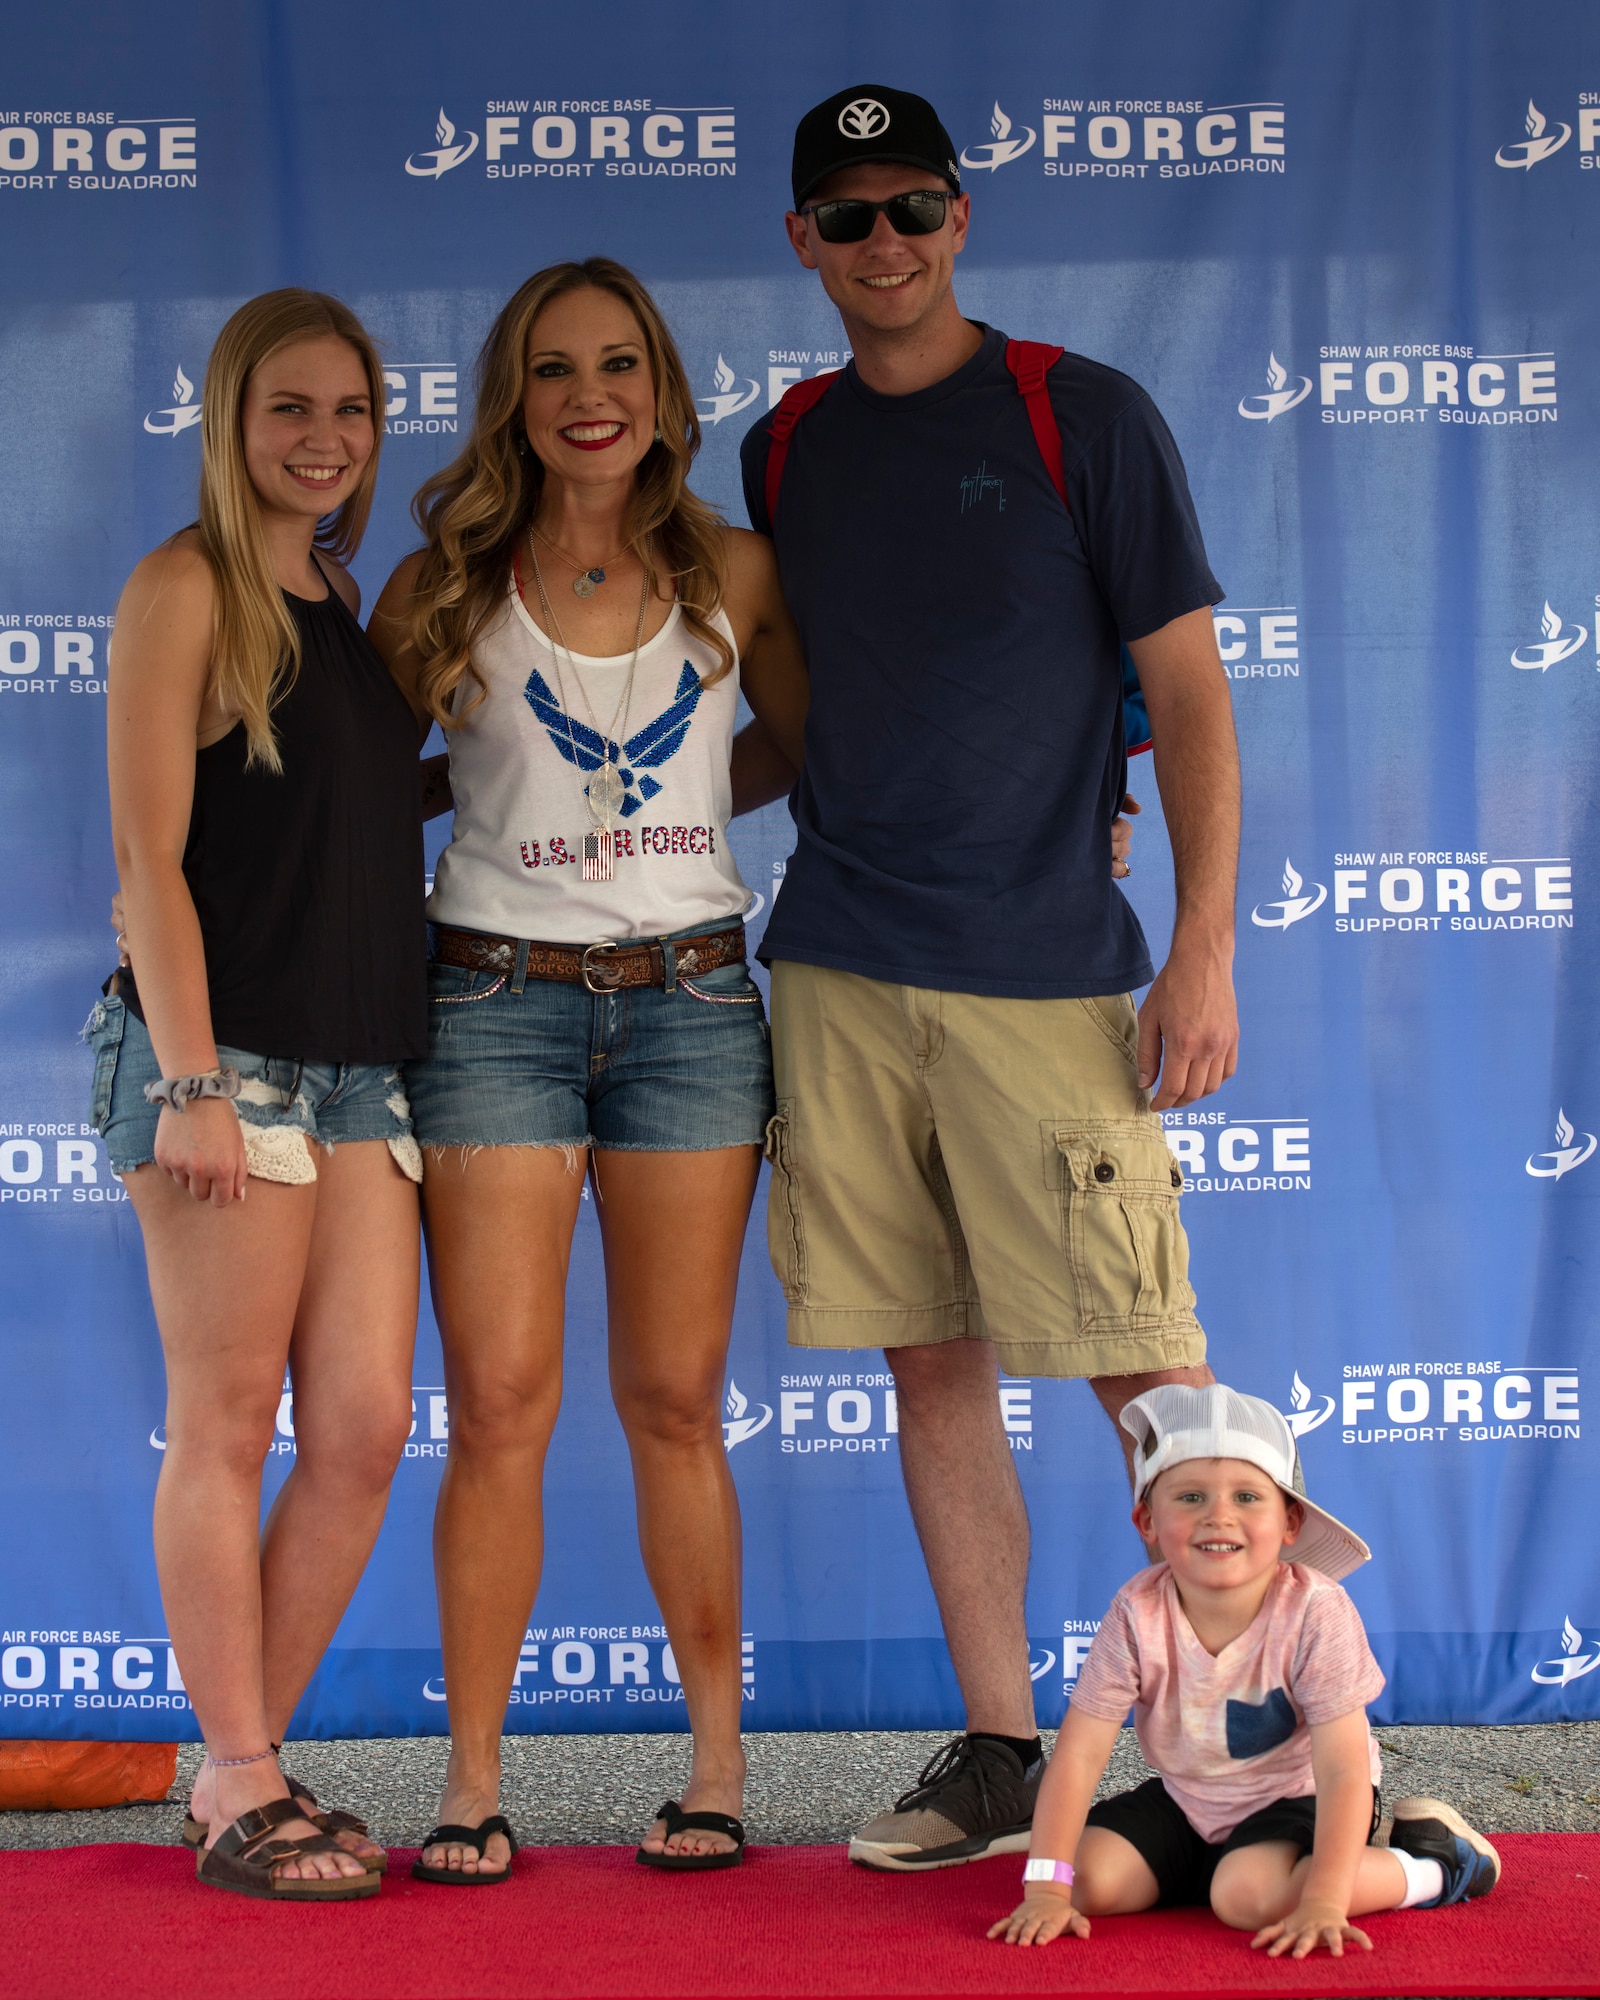 Leslie Tom, country music artist, center, stands with Team Shaw members during the 20th Force Support Squadron Freedom Bash at Shaw Air Force Base, South Carolina, June 29, 2019.